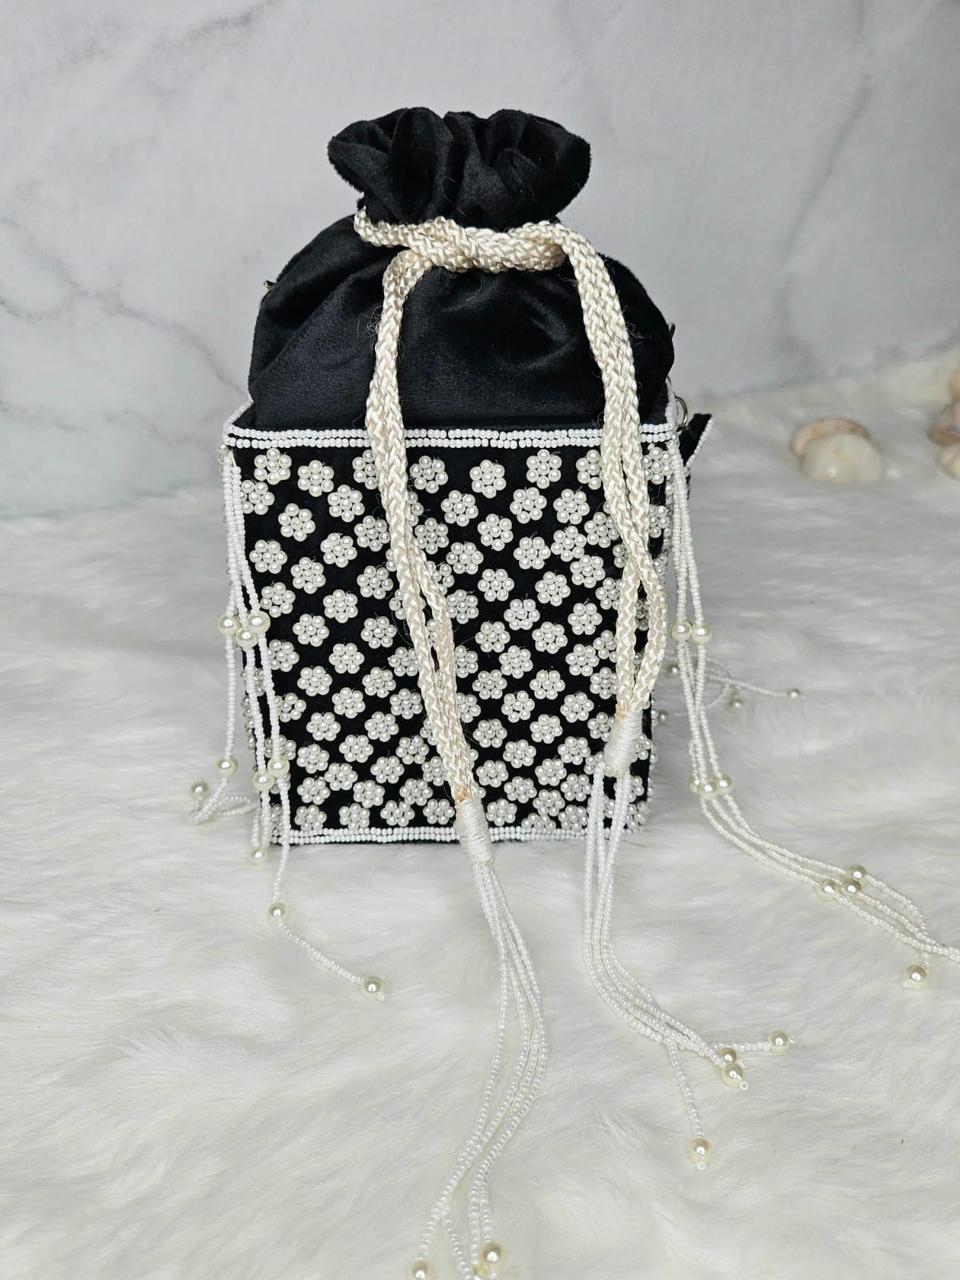 Bags - Fabric Pouches - Lace Pouches - Packaging Decor